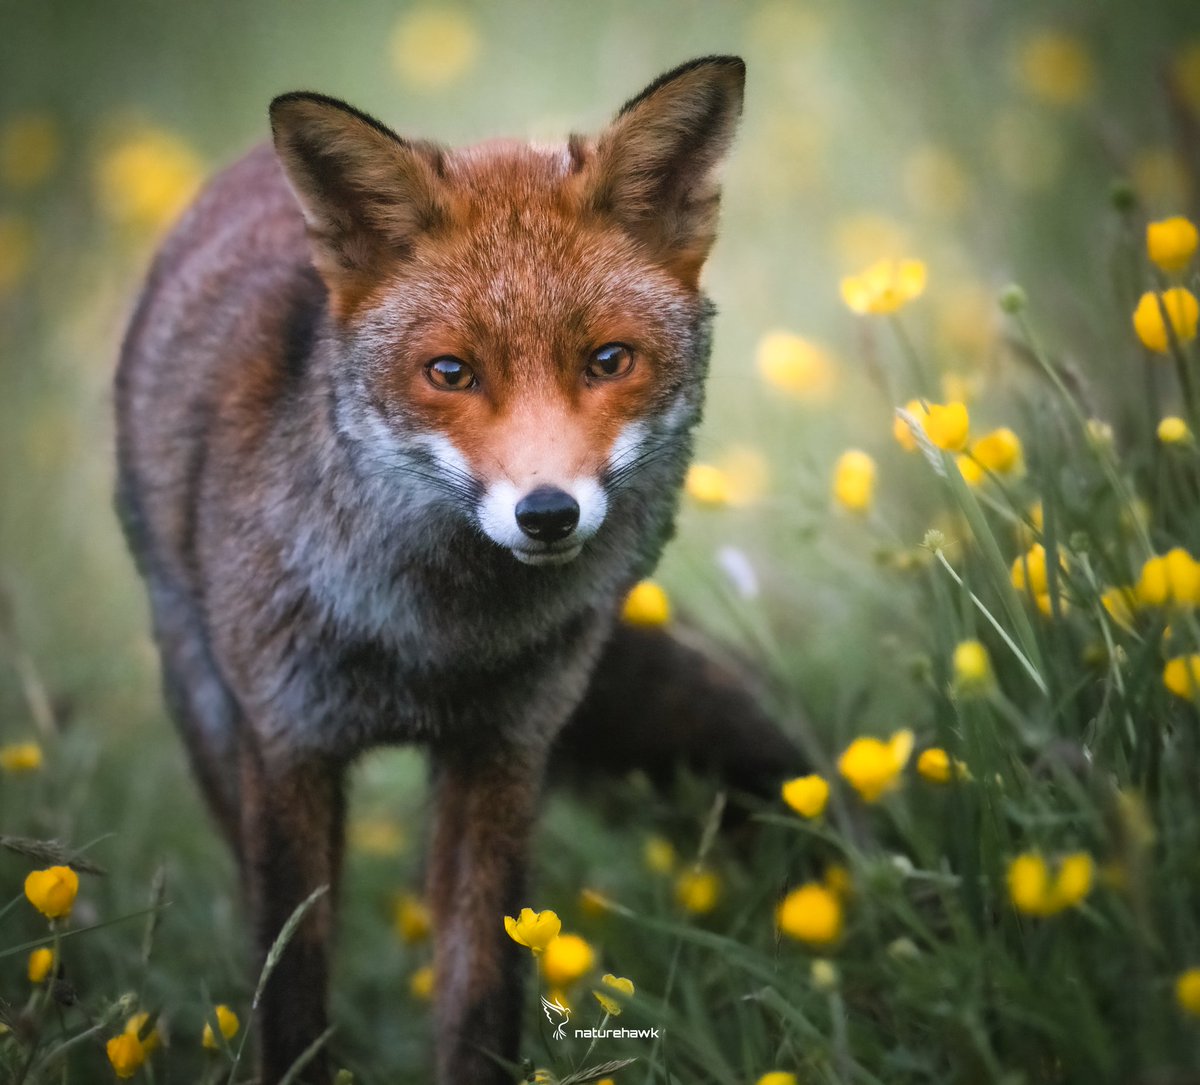 Pucker Up Buttercup... If your eyeballs have had the sight of Bluebells & Daffodil images seared into the back of your retinas recently...then I have the antidote just for you... @NikonEurope Z8 & 500mm pf f5.6 #foxoftheday @UKNikon